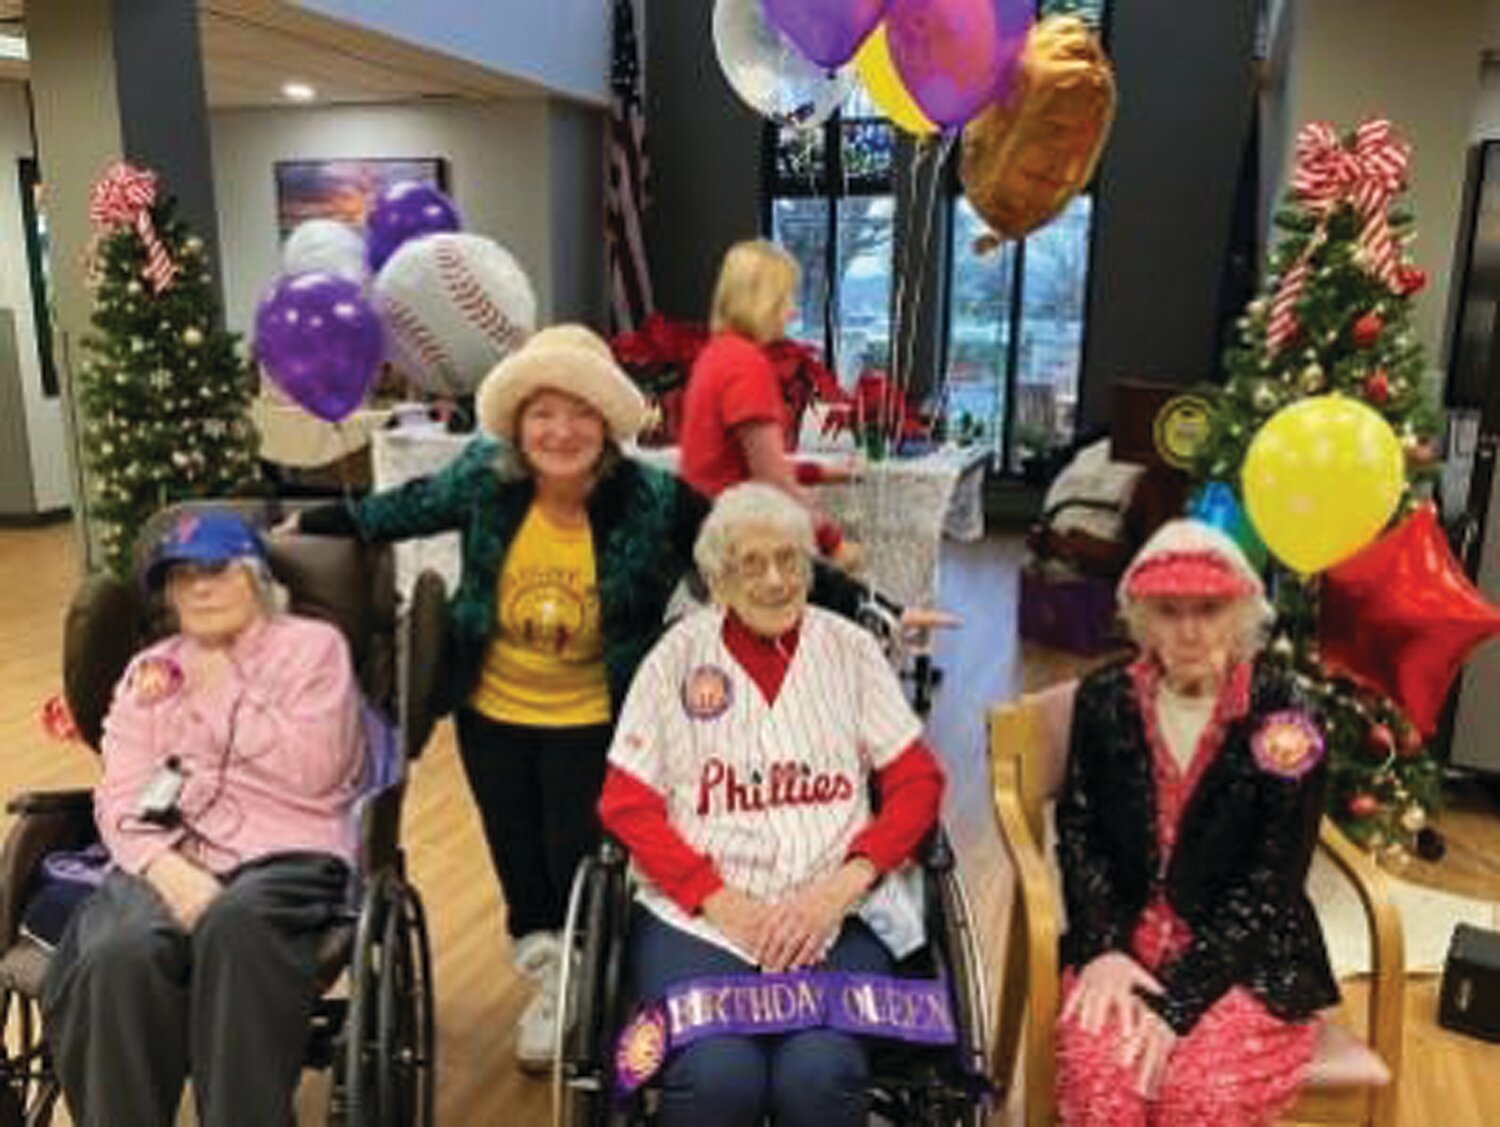 Three Neshaminy Manor residents celebrated their 103rd birthdays last week with a Twilight Wish Foundation wish to have a visit from the Phillie Phanatic. From left, Emma Ventresca, Cass Forkin, founder and chairwoman of Twilight Wish, Esther Welch and Ann Nieswander.